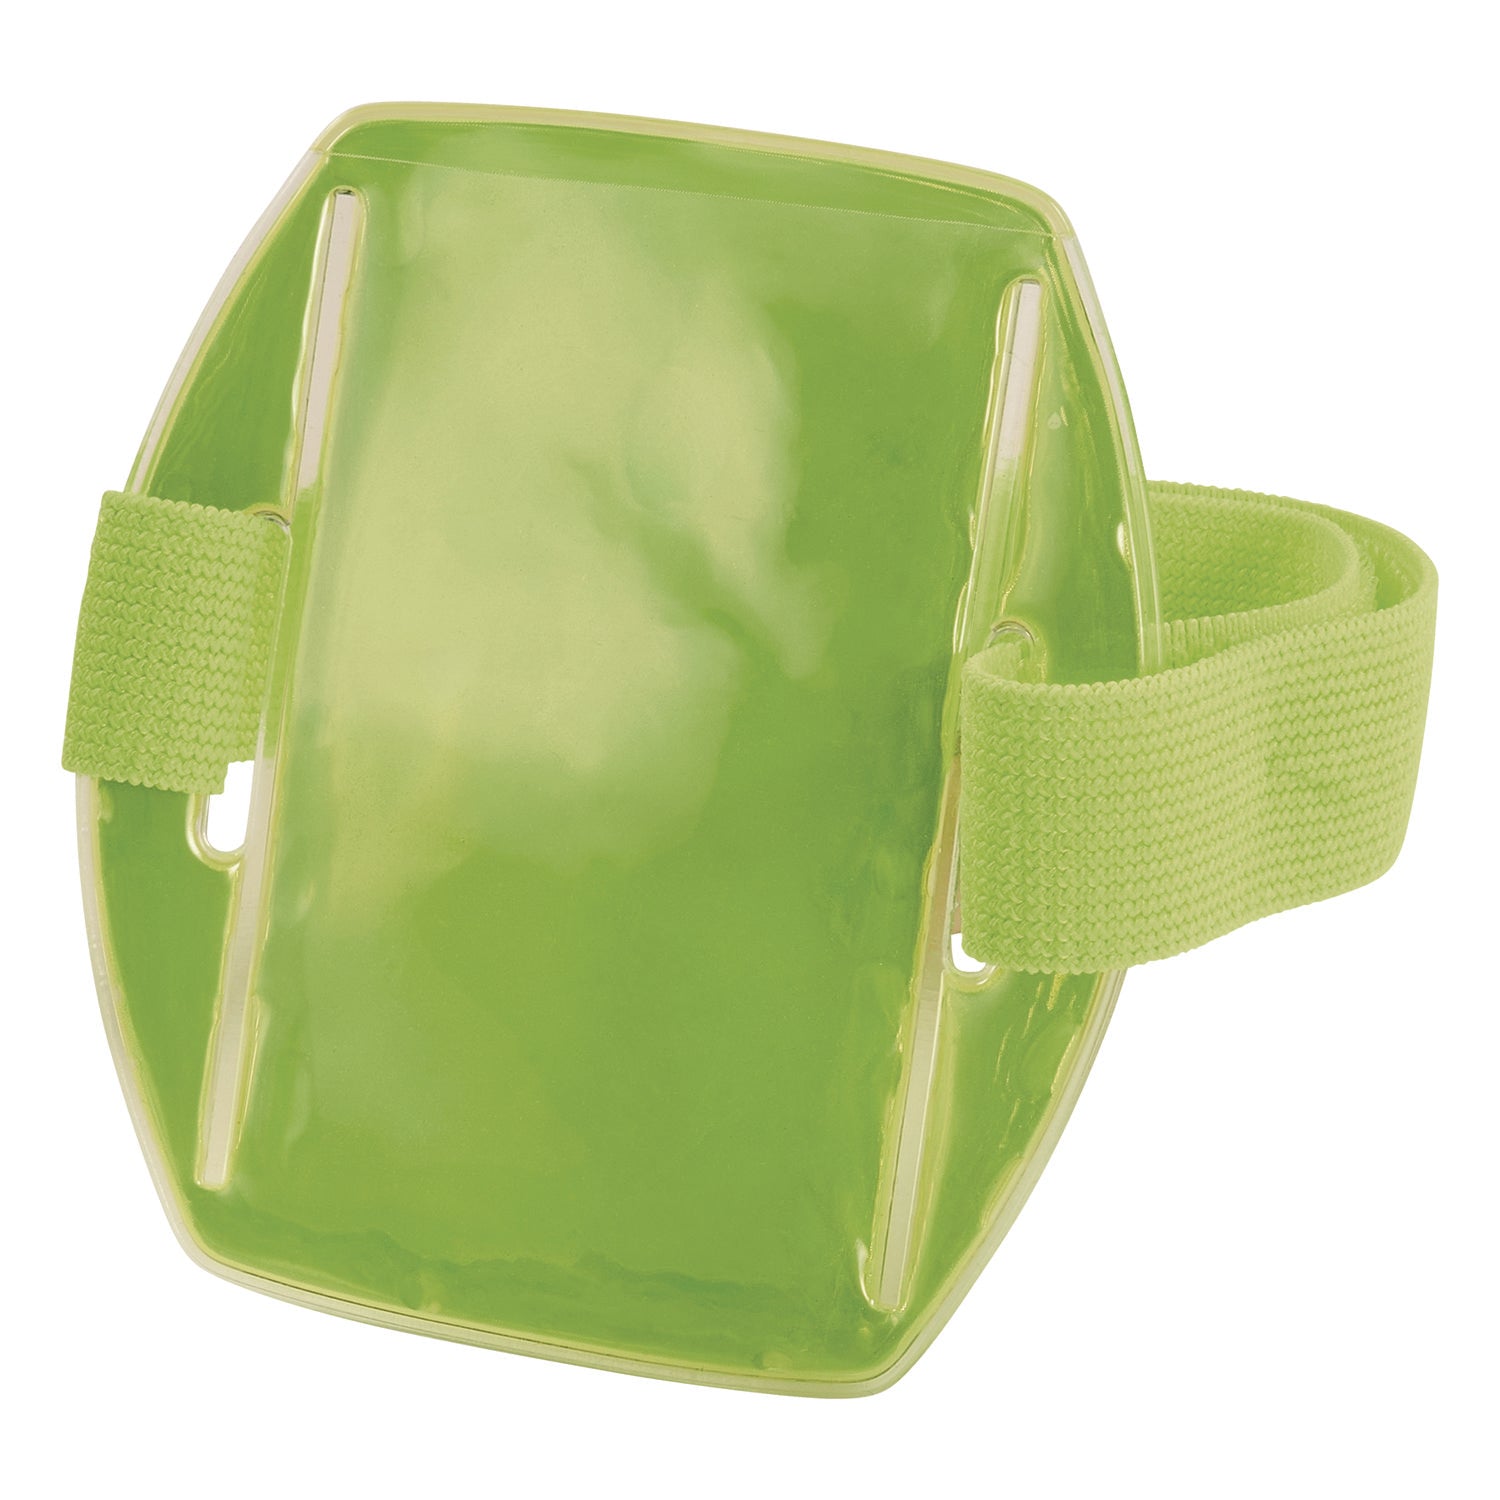 squids-3386-arm-band-id-badge-holder-vertical-lime-375-x-425-holder-25-x-4-insert-ships-in-1-3-business-days_ego19956 - 1